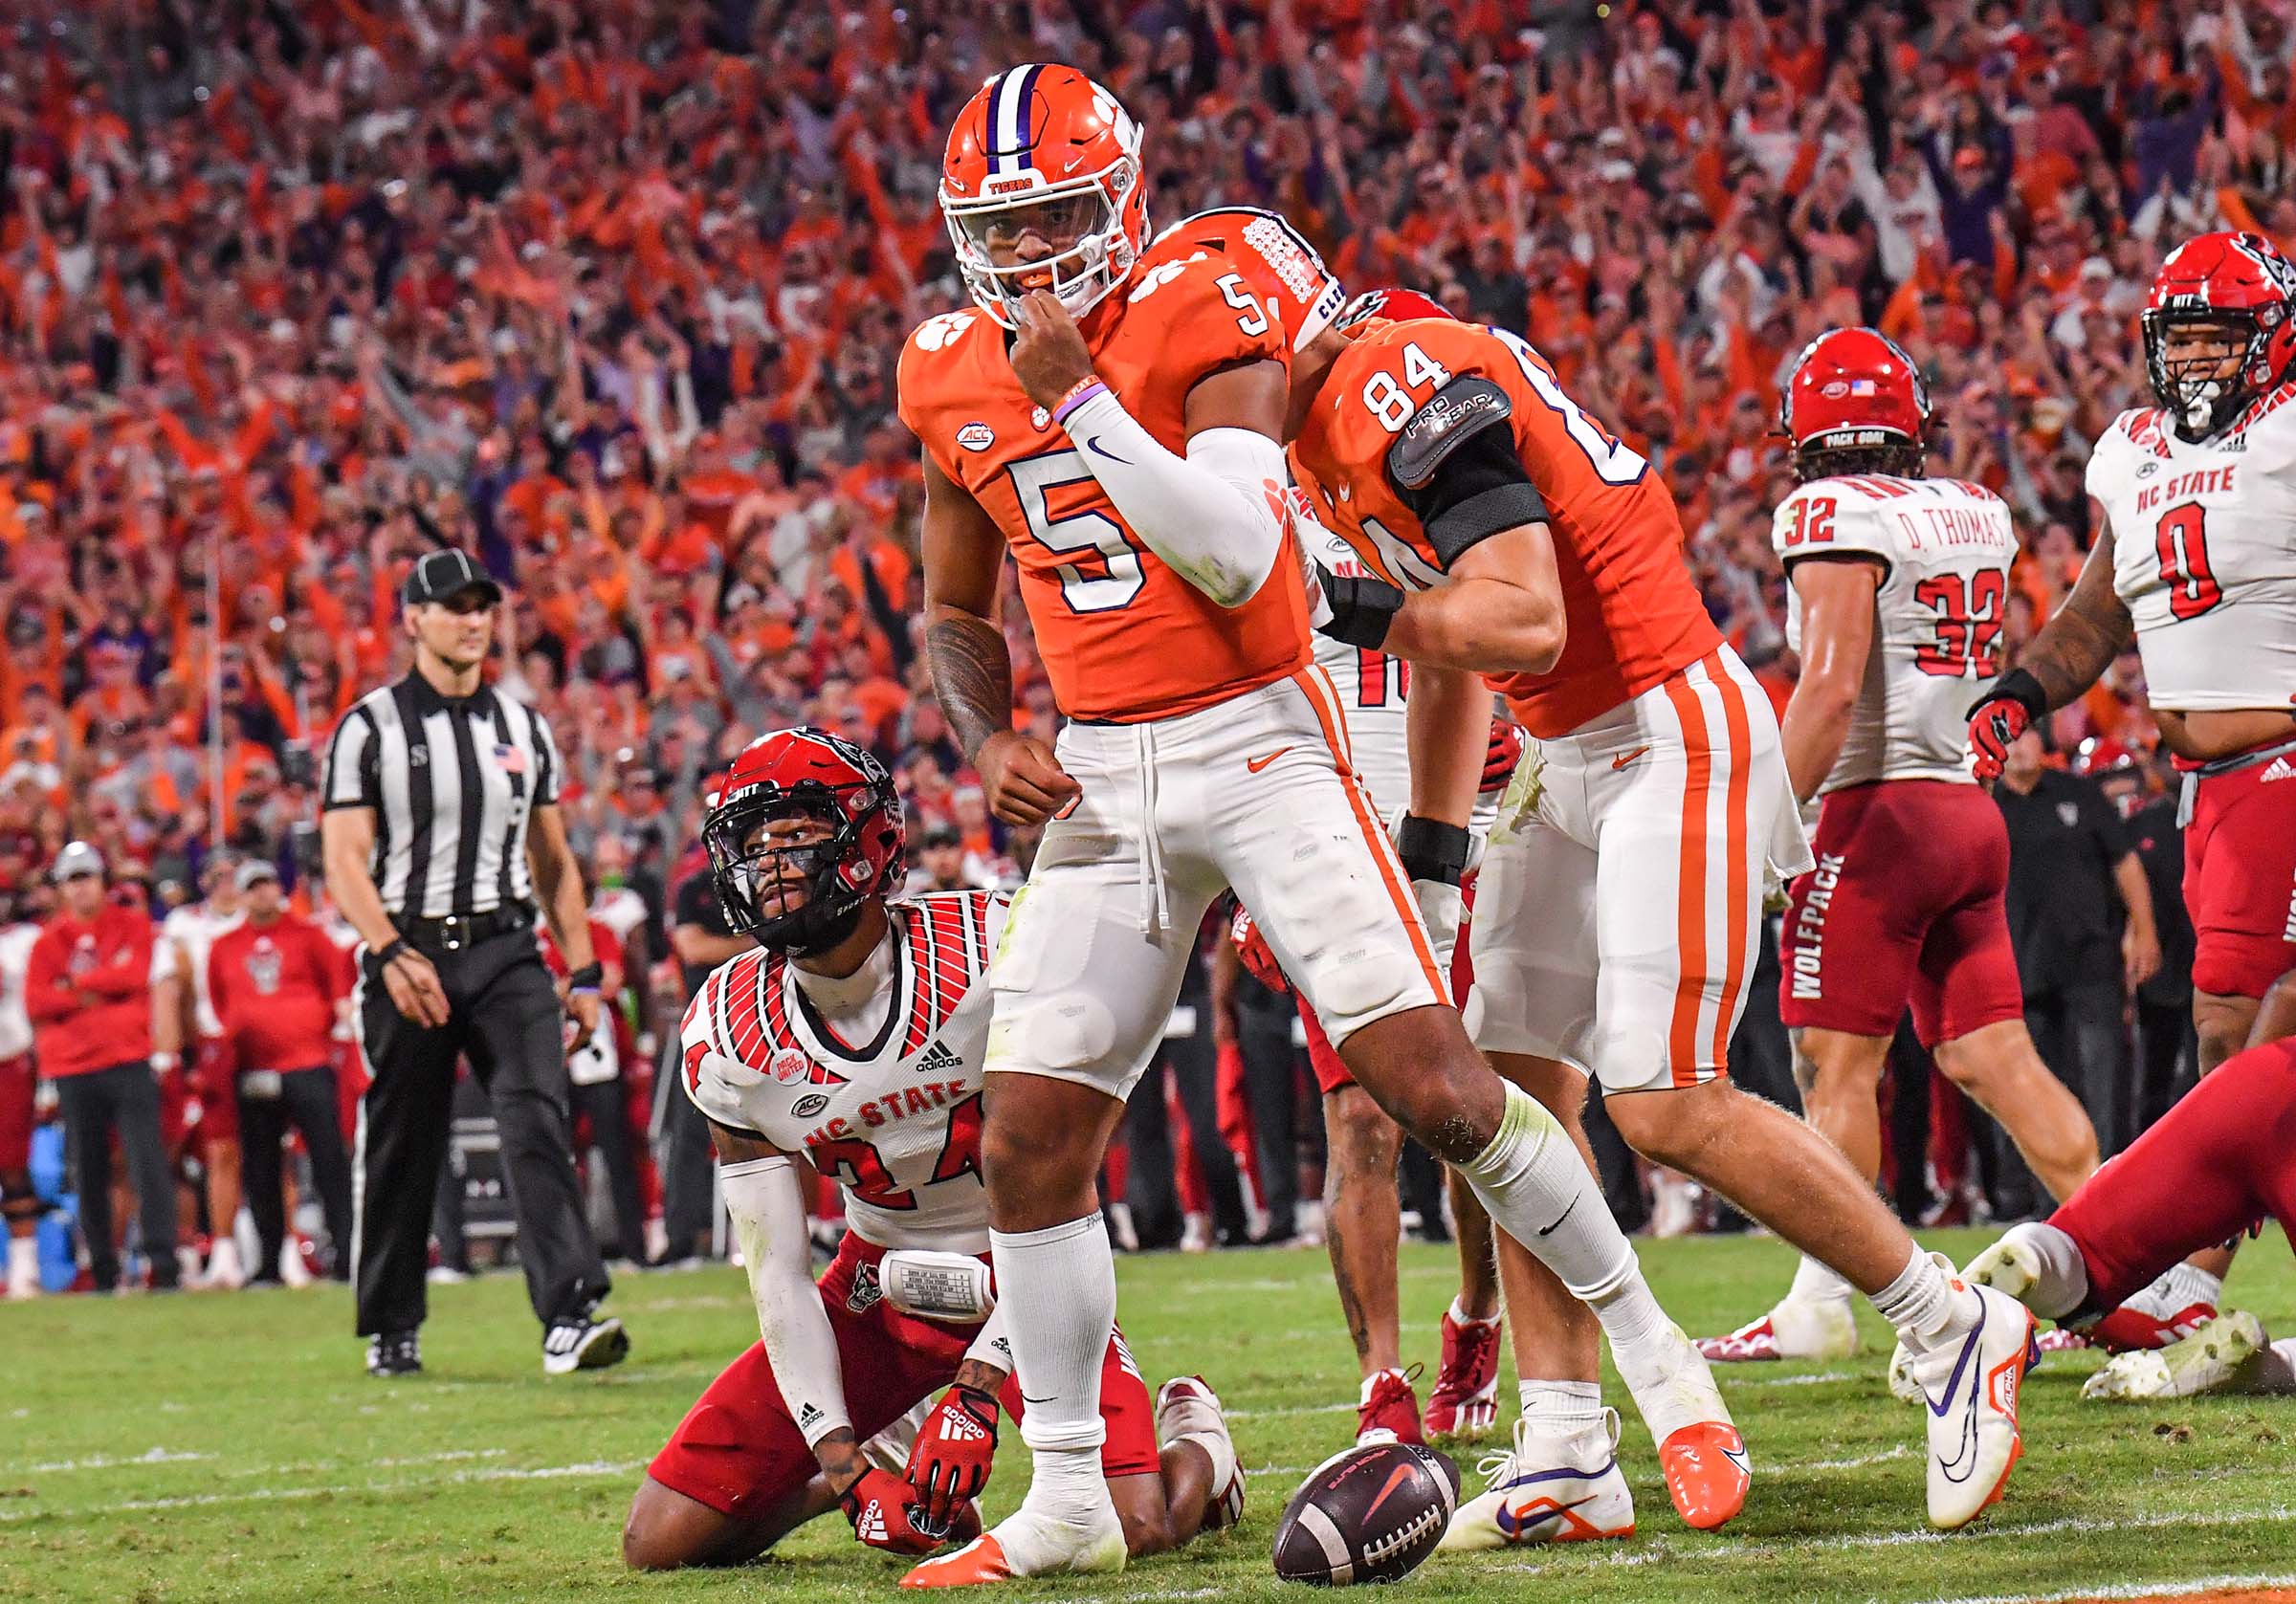 Best photos from Week 5 of the 2022 college football season